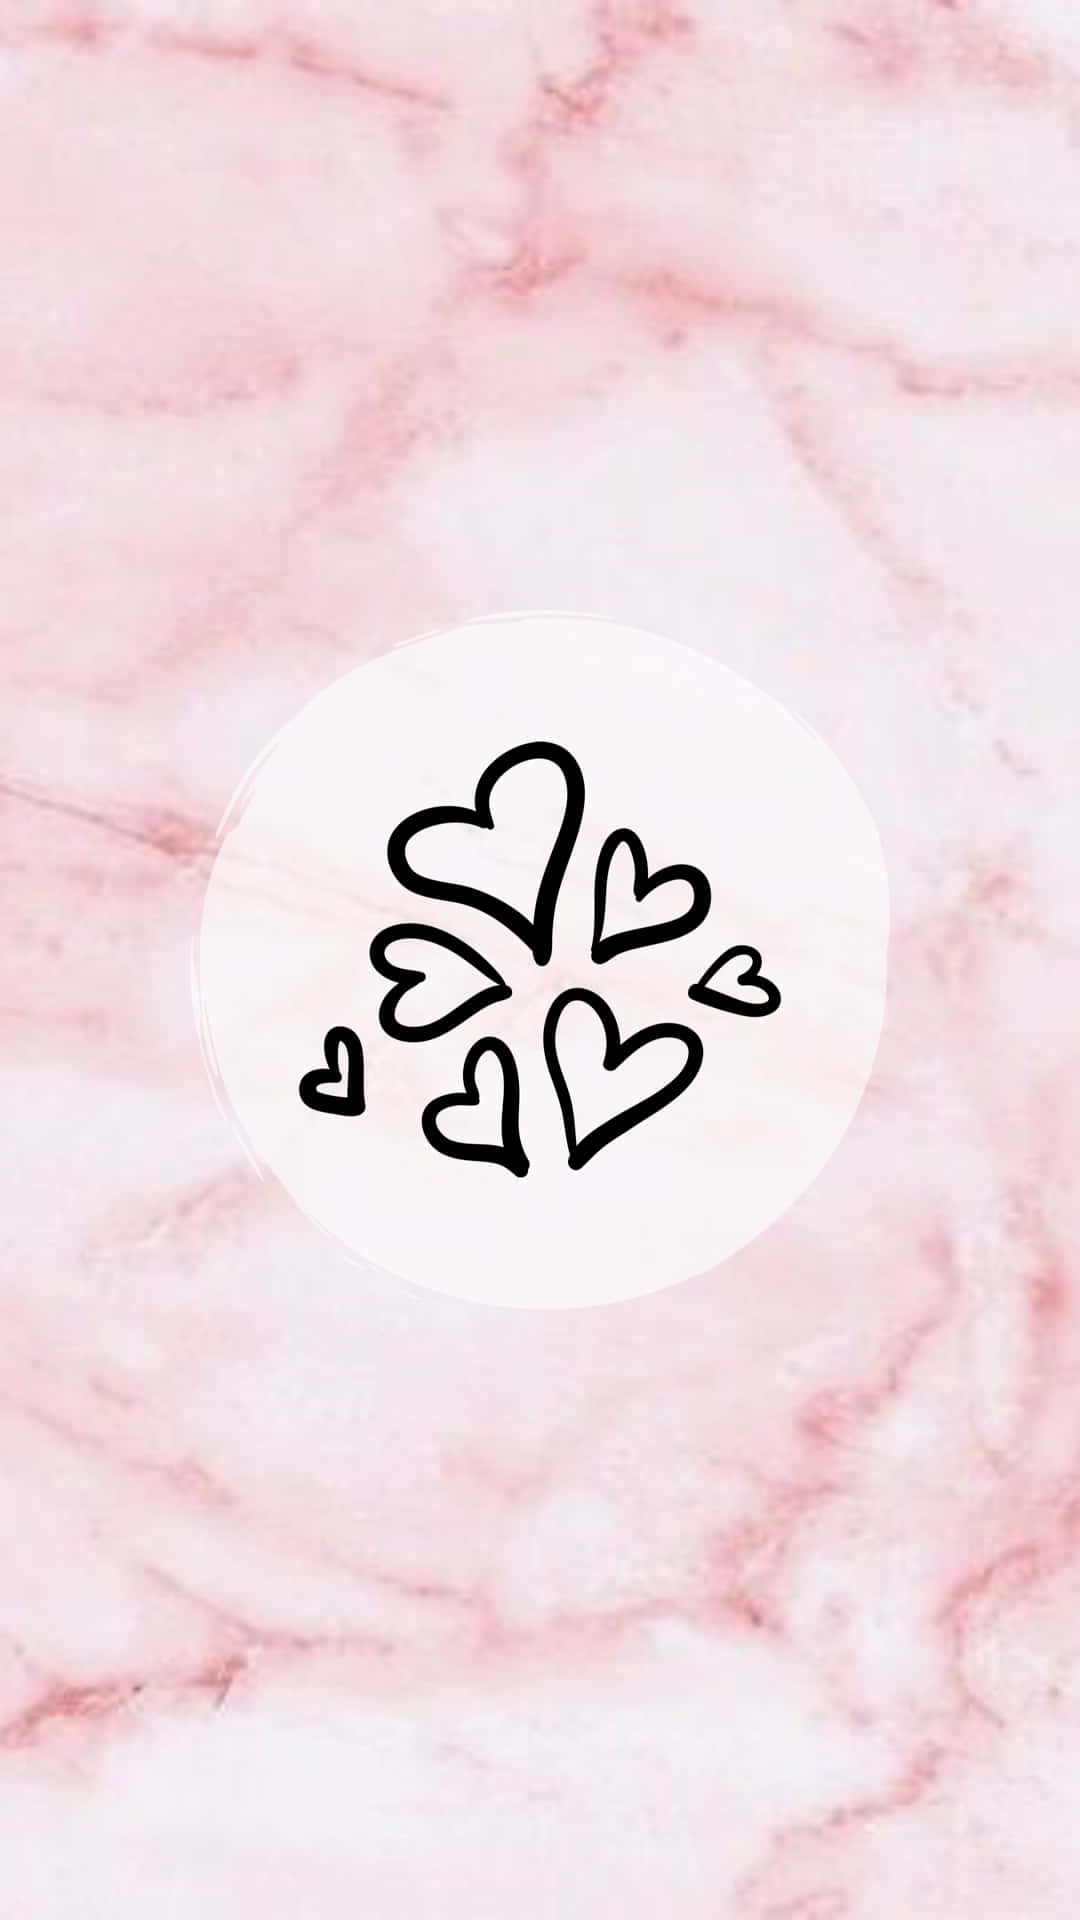 Ig Story Background Doodle Of Hearts Pink Marble Backdrop